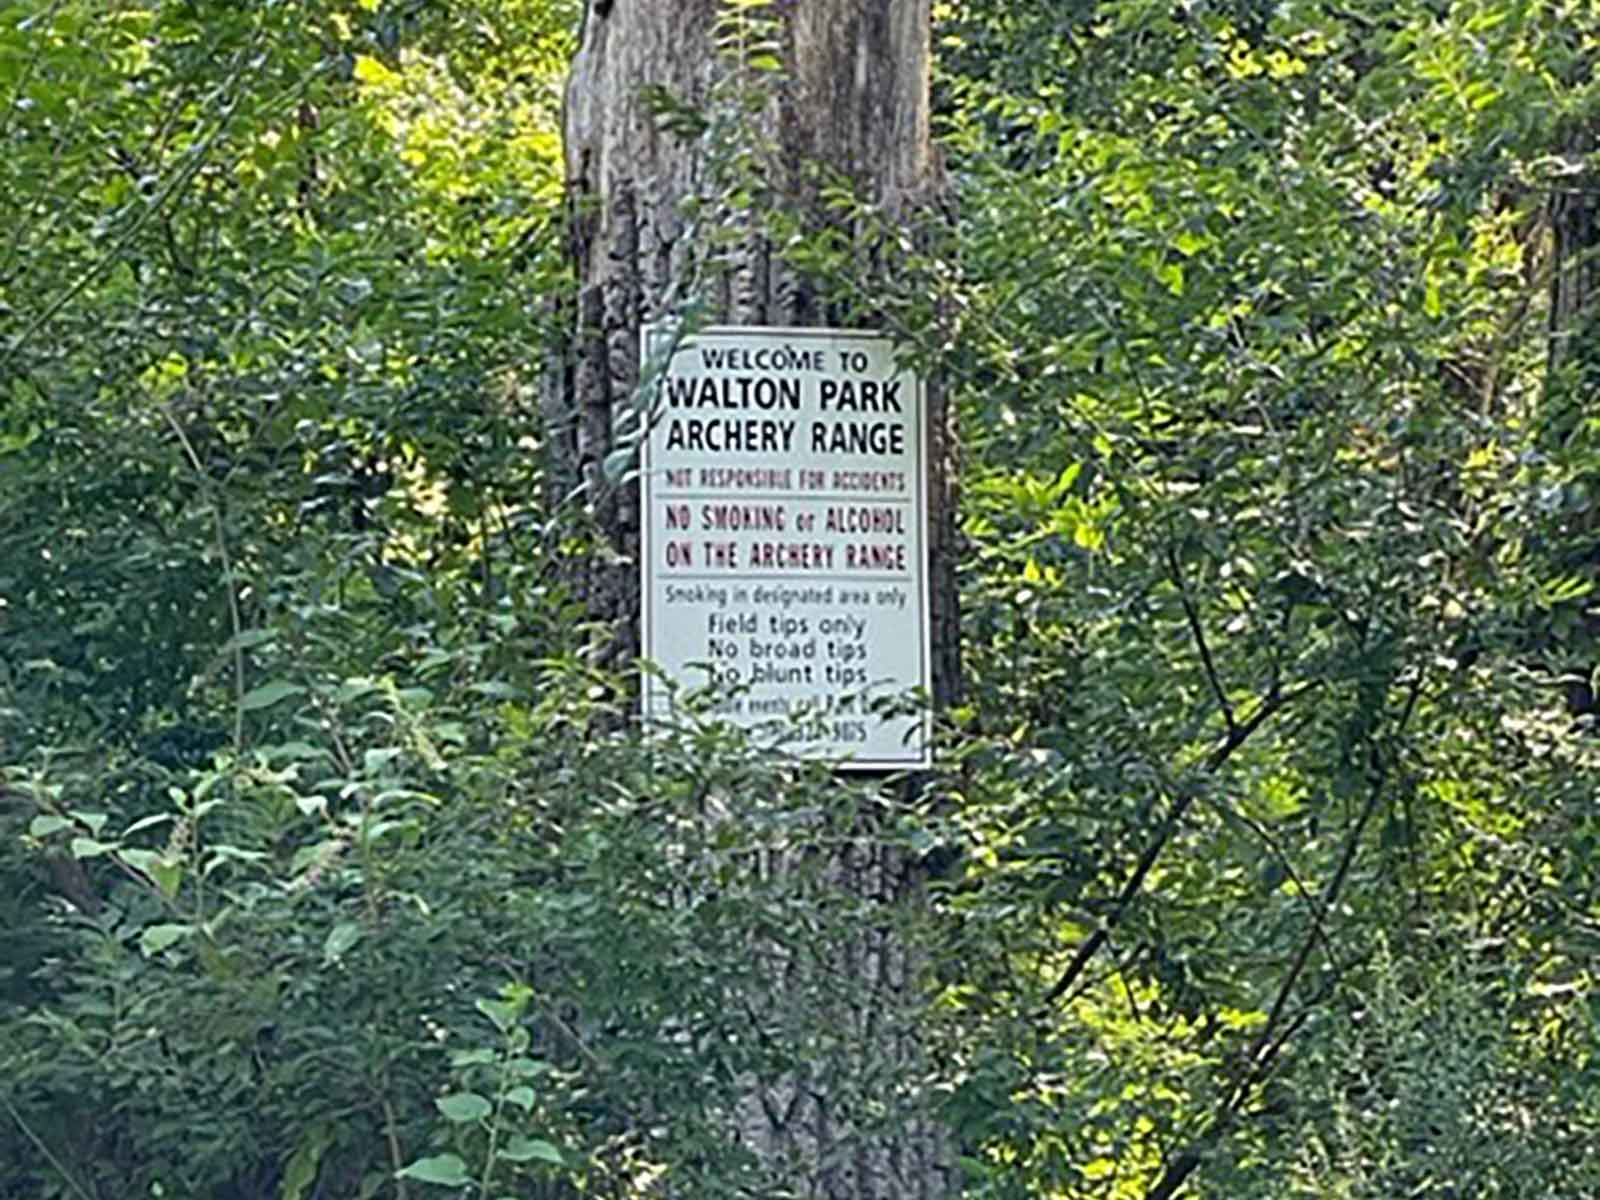 archery range rules sign attached to a tree